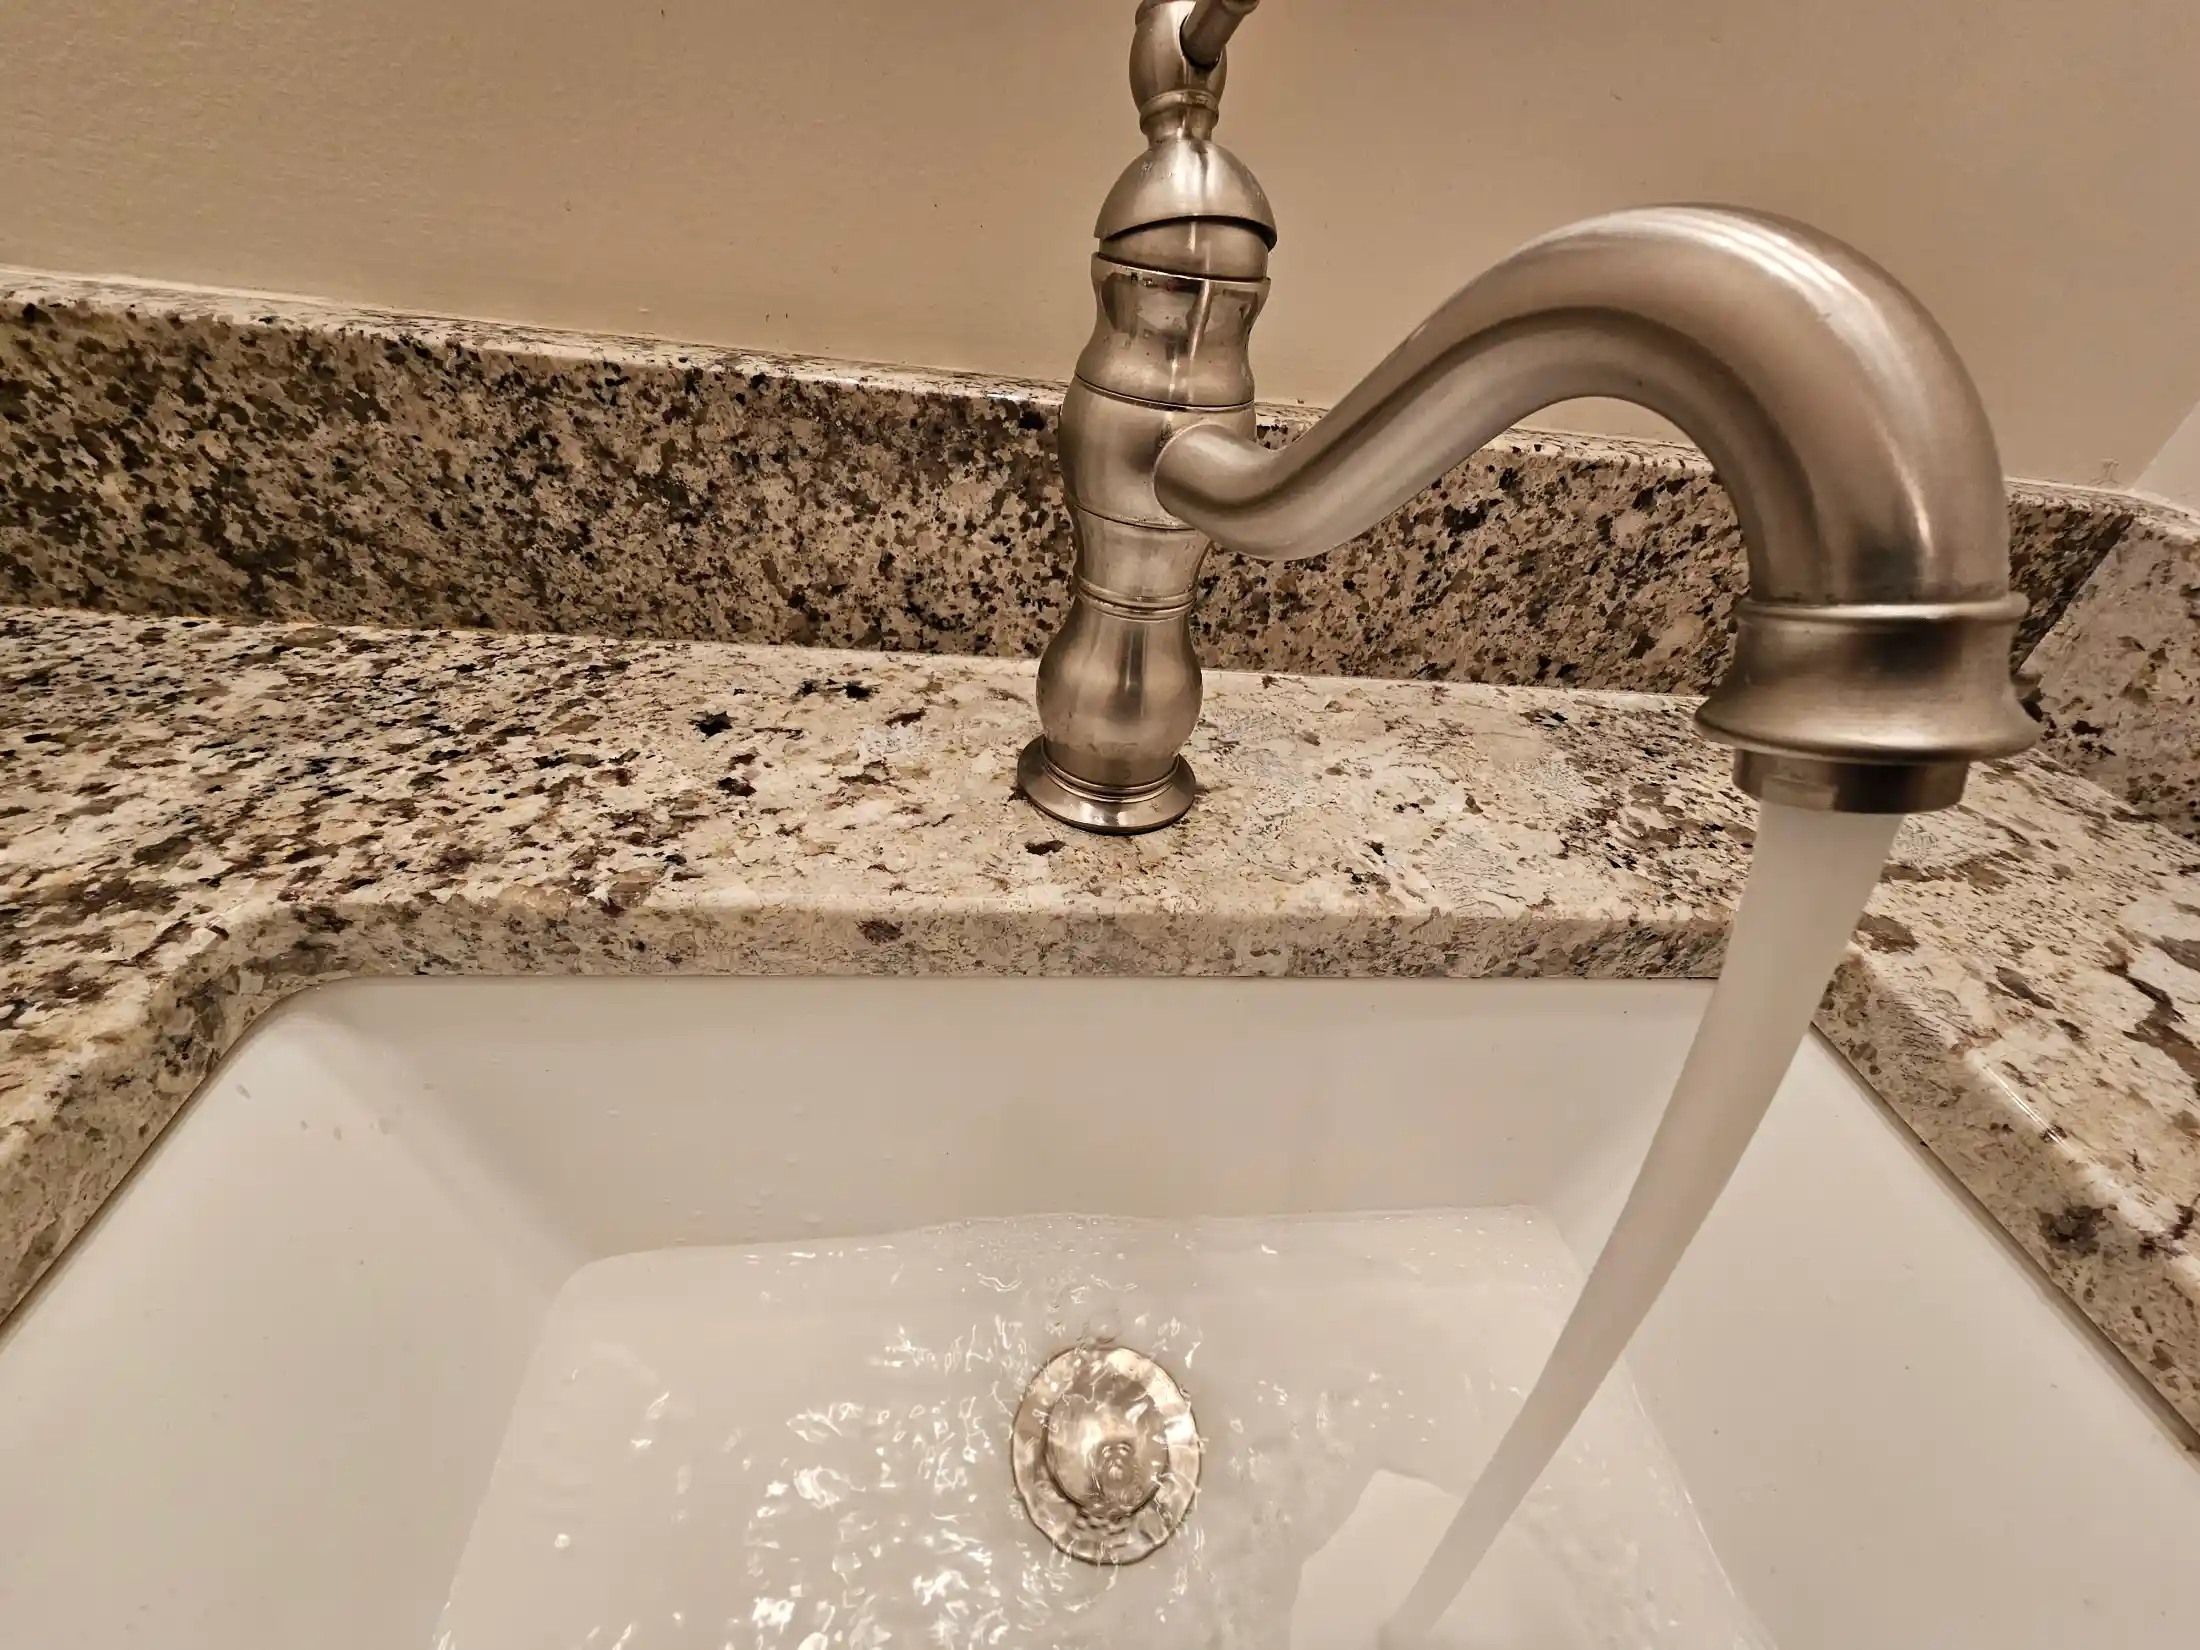 Bathroom sink and silver faucet